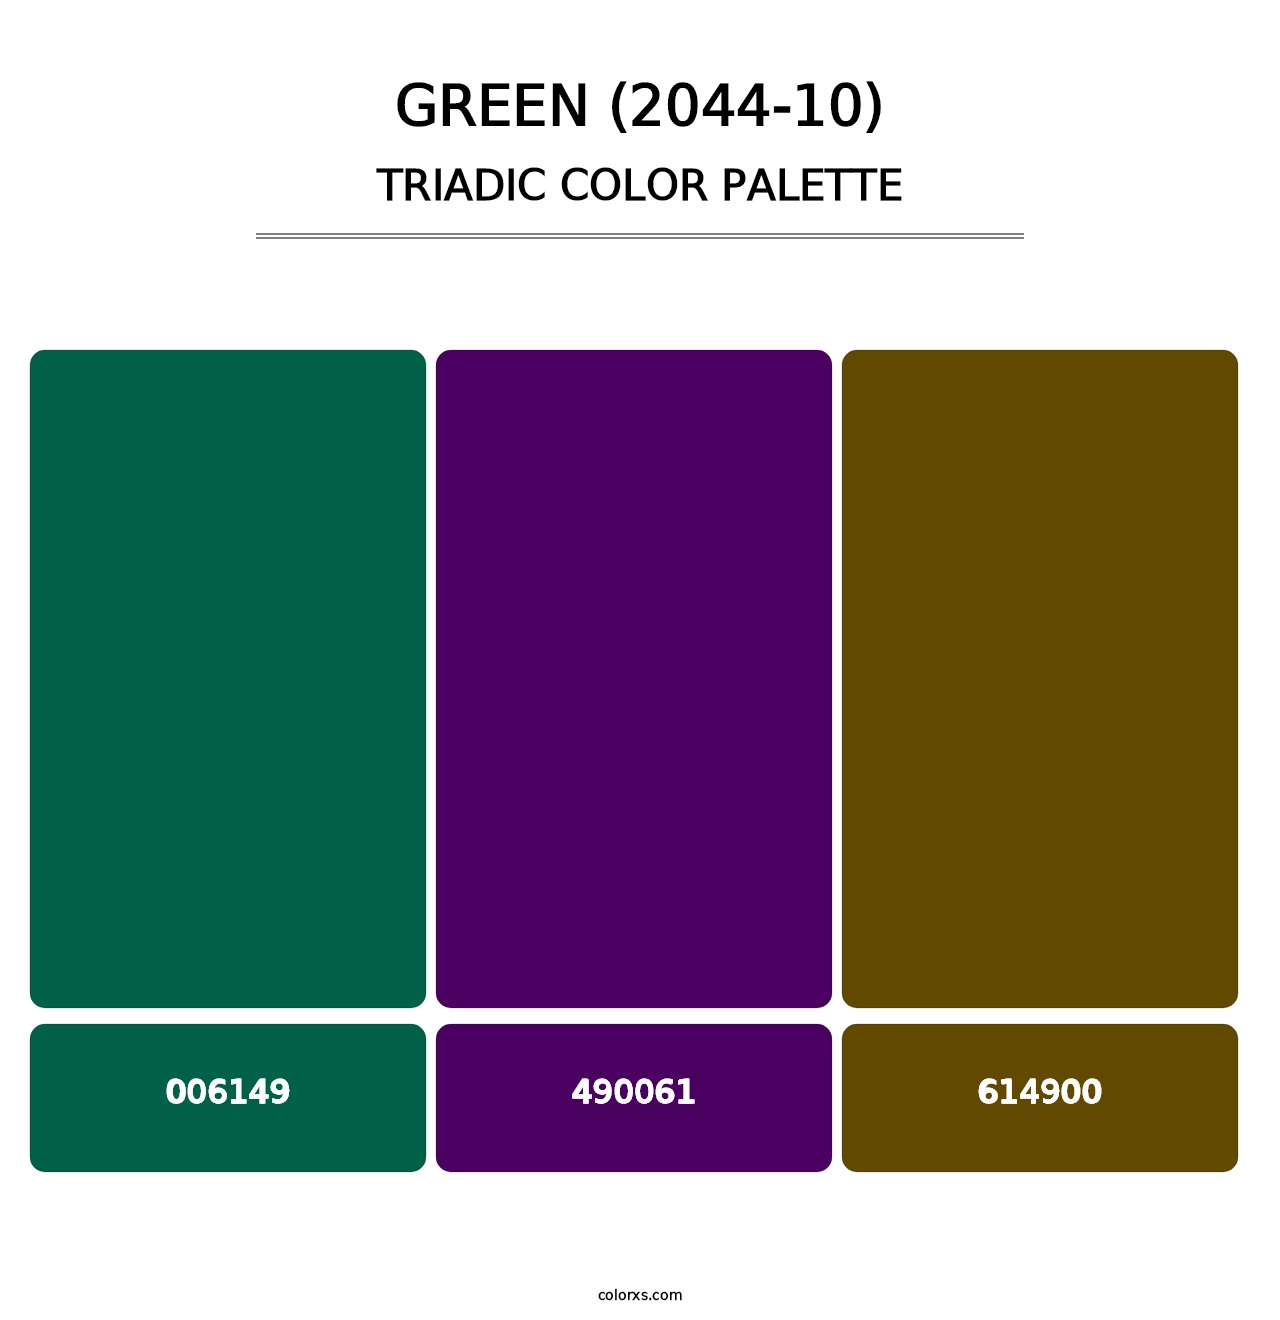 Green (2044-10) - Triadic Color Palette